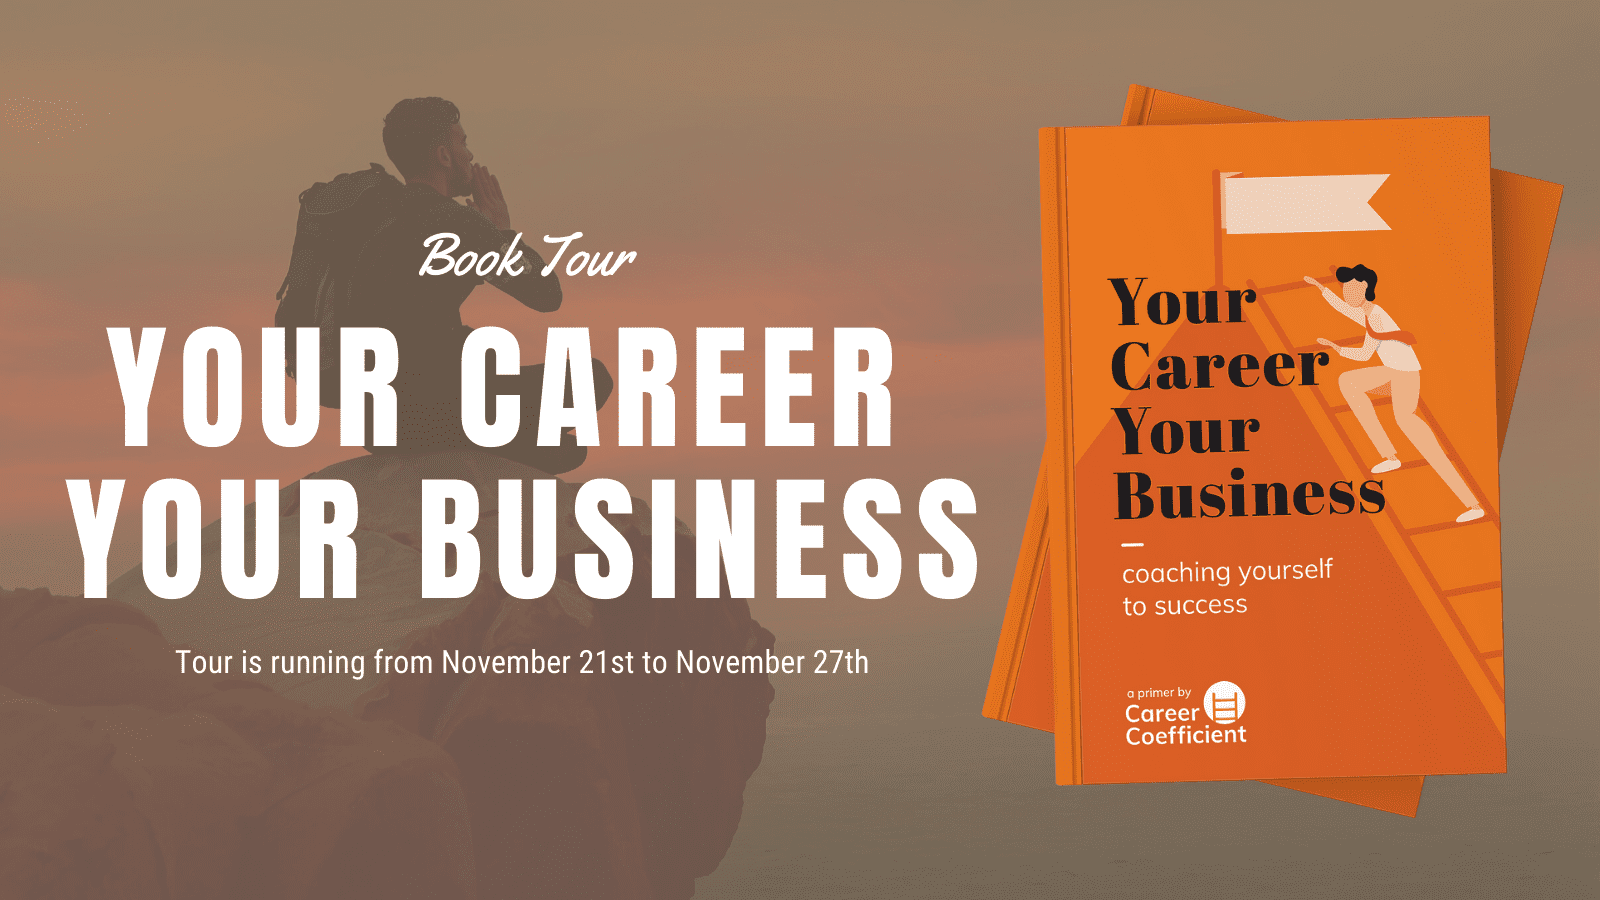 Your Career Your Business by Gina Cajucom | Excerpt & Spotlight